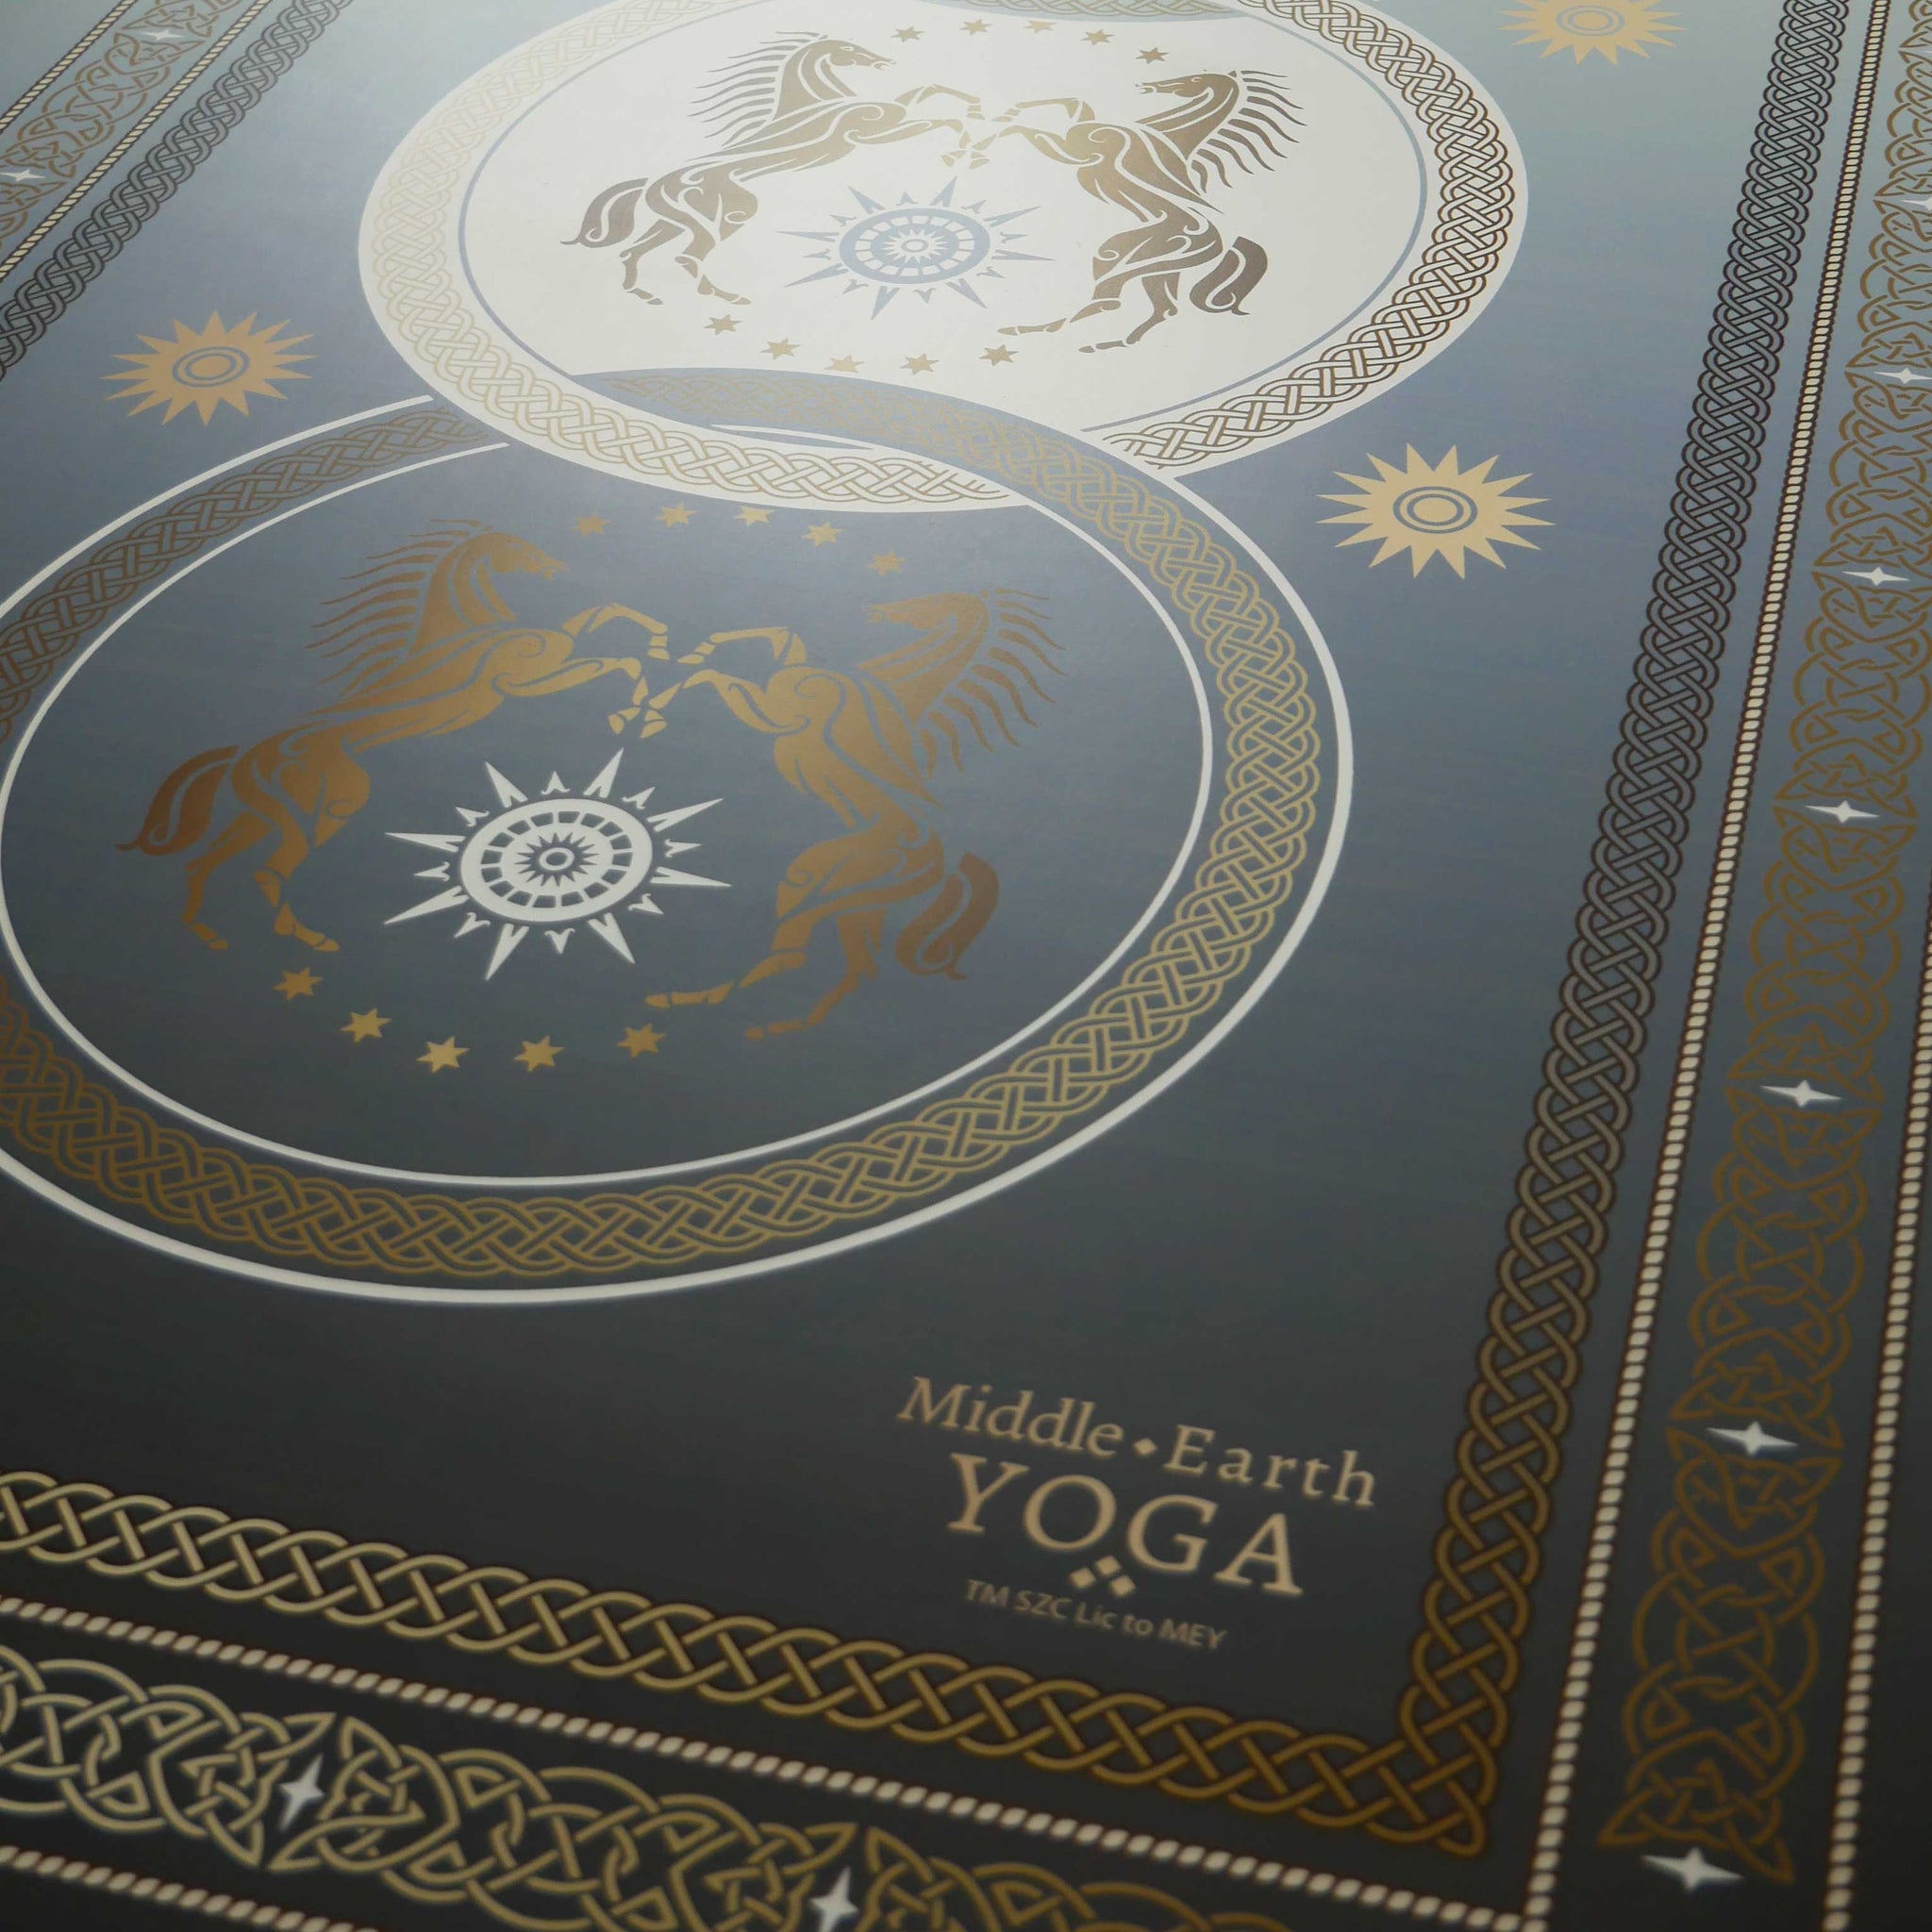 Middle-earth Yoga™ - luxury mats inspired by the Lord of the Rings – Middle  Earth Yoga